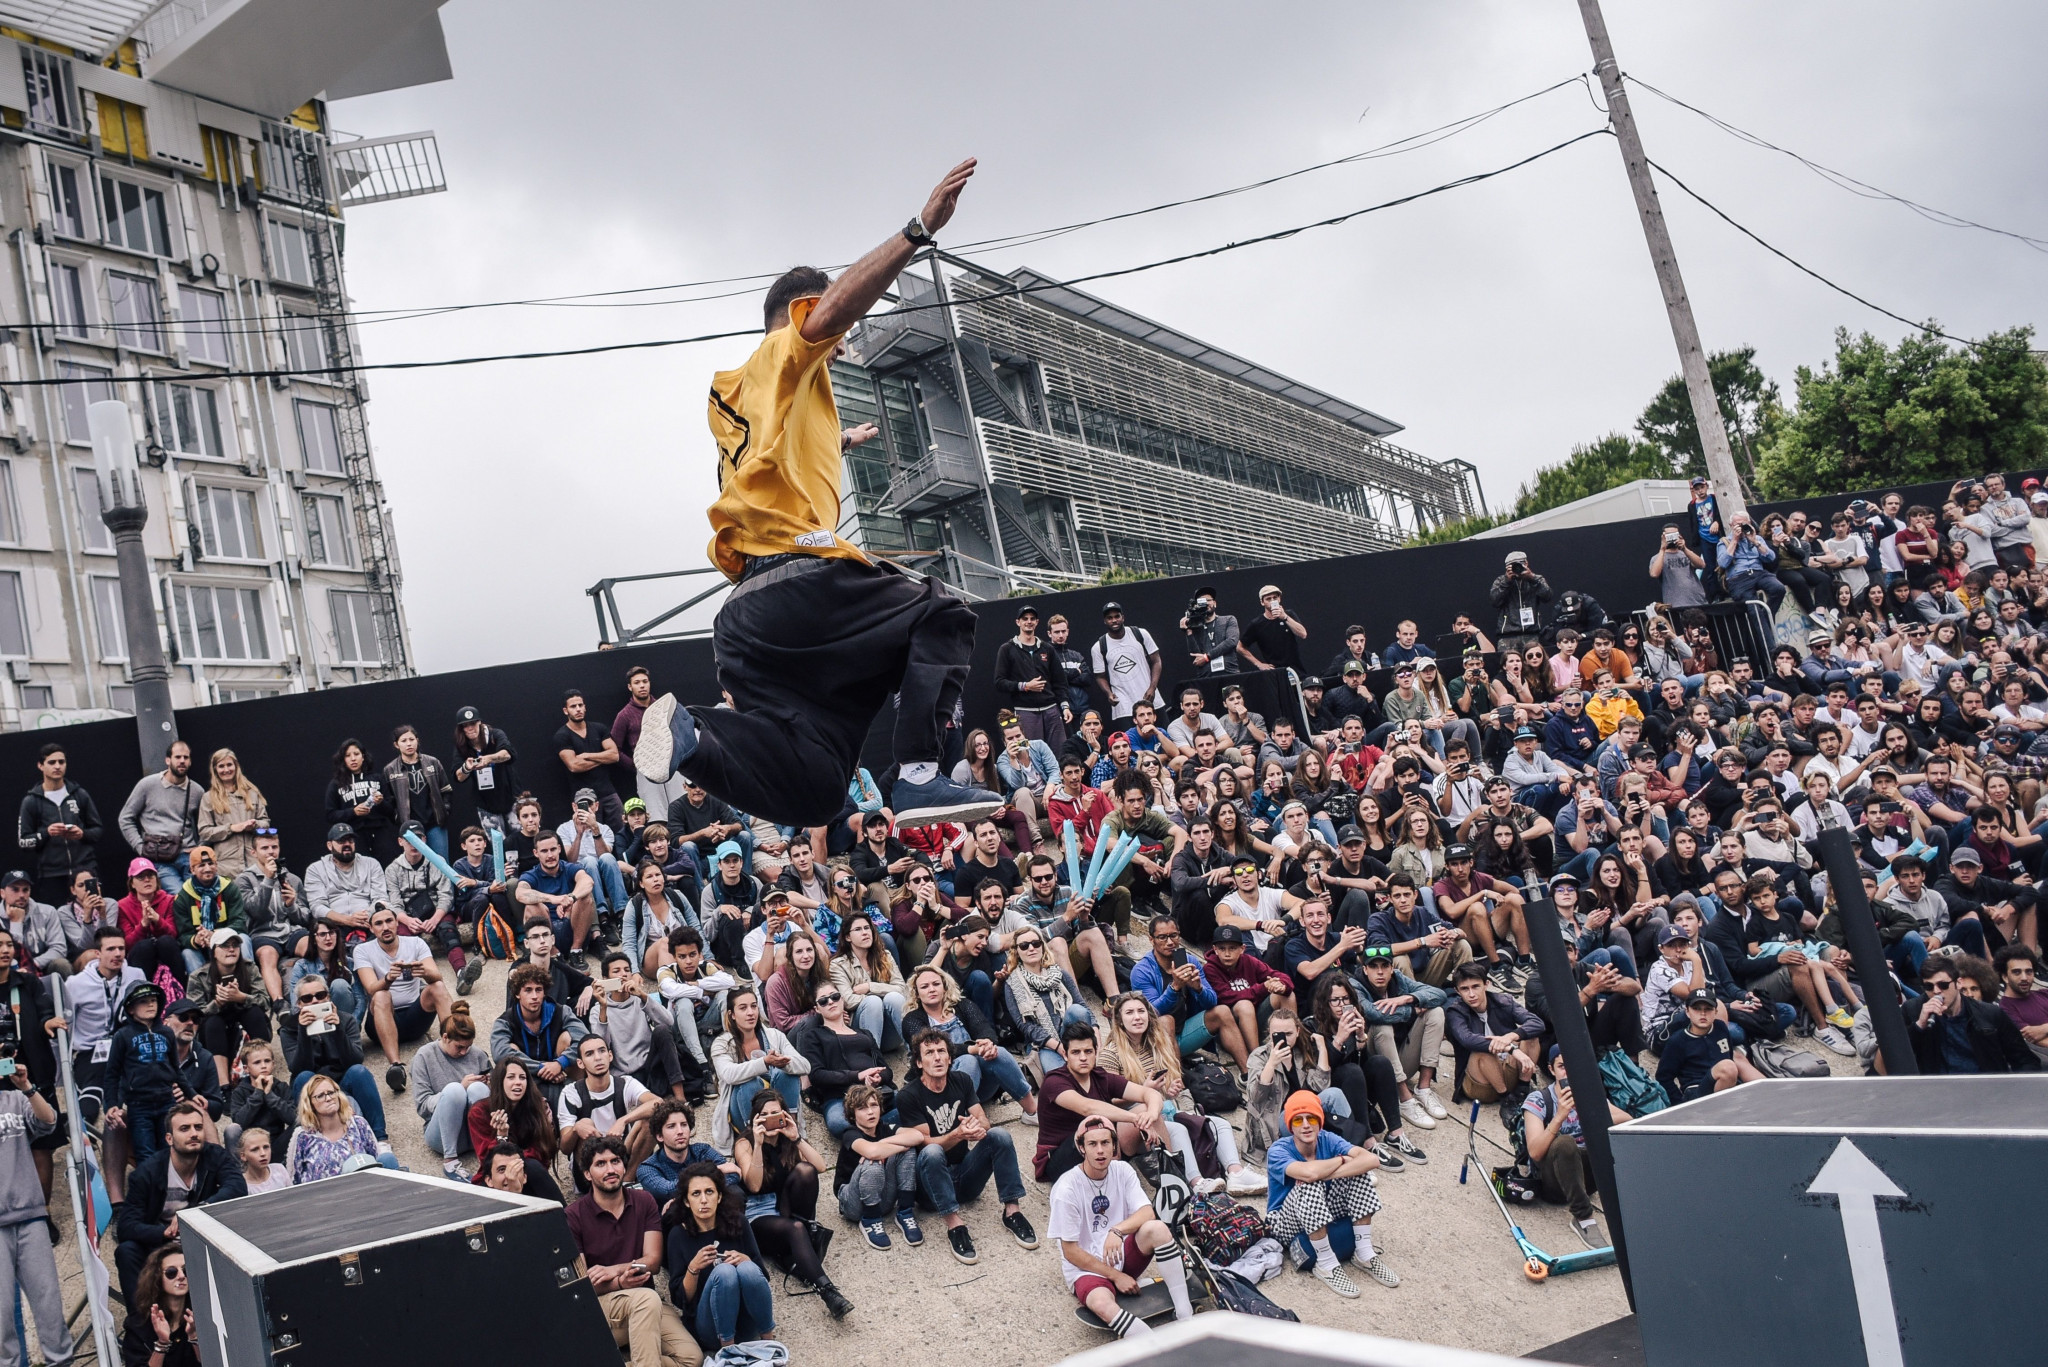 FISE World Series in Montpellier to be organised digitally